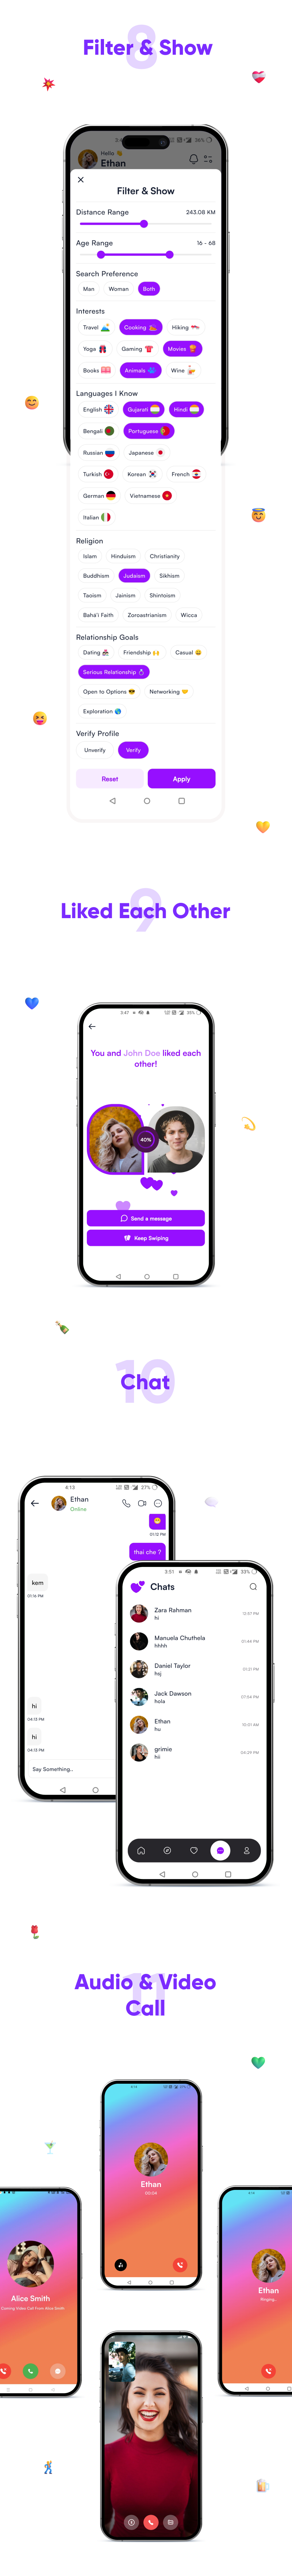 GoMeet - Complete Social Dating Mobile App | Online Dating | Match, Chat & Video Dating | Dating App - 3